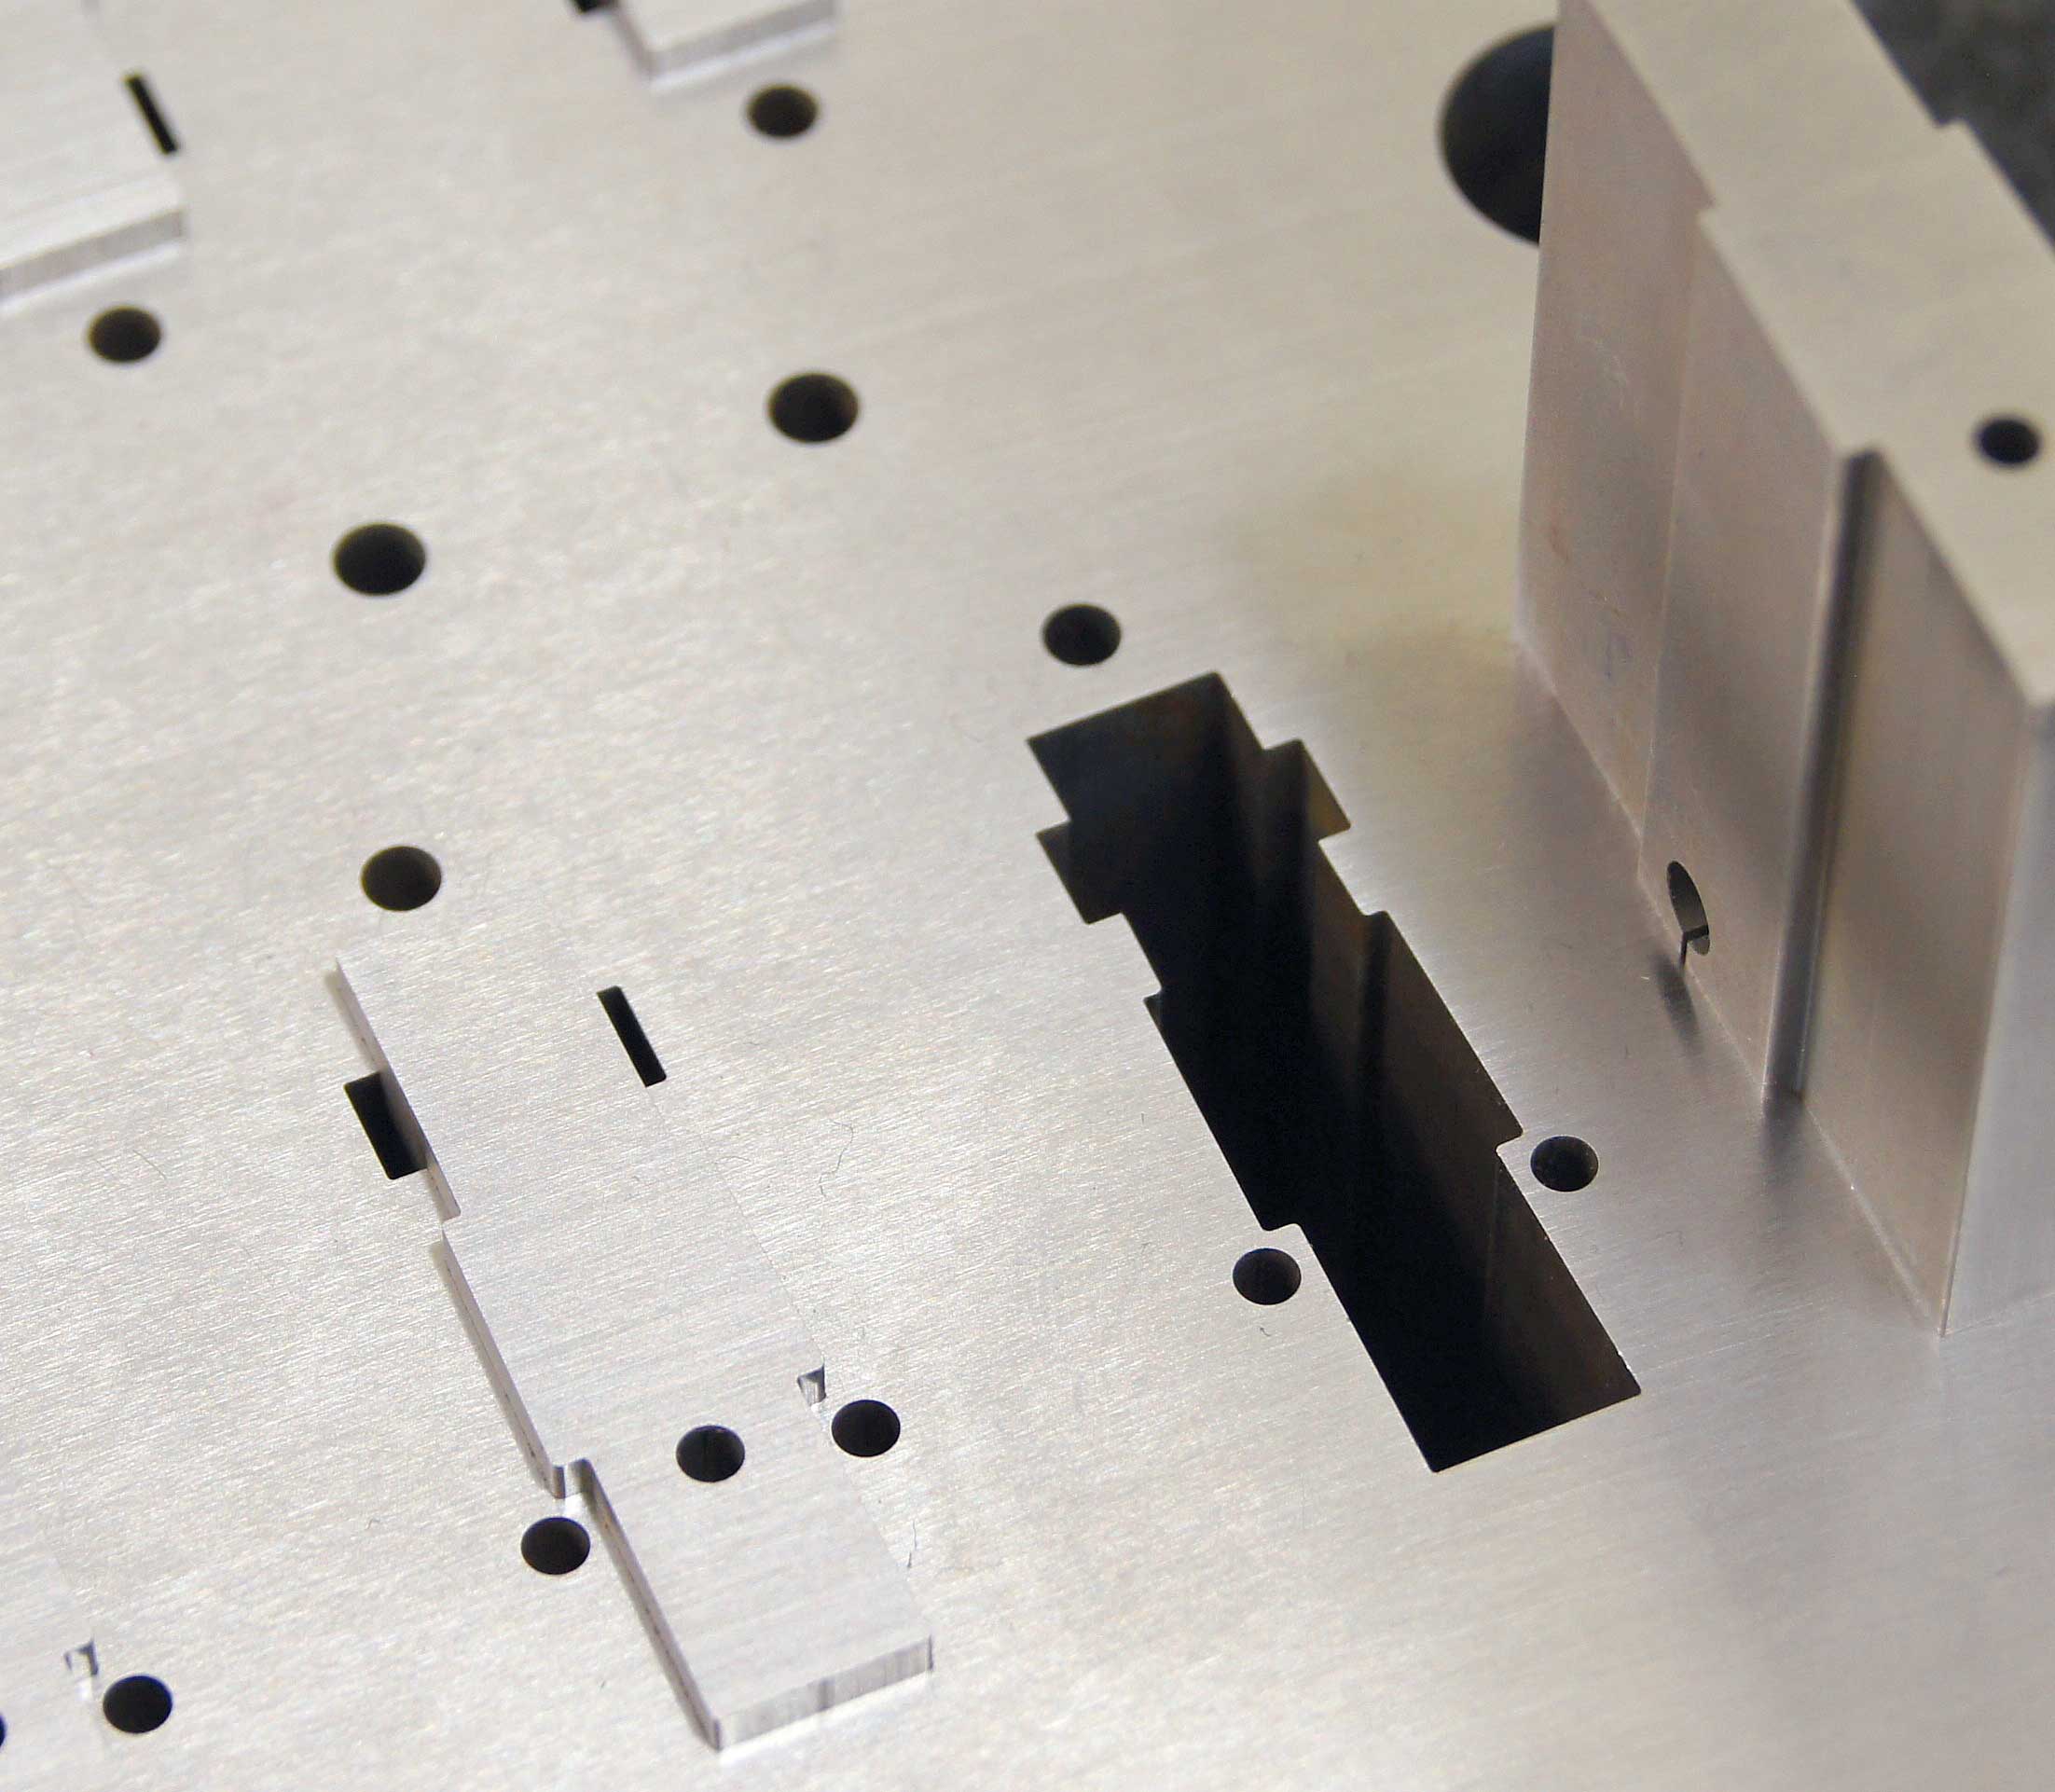 Mitsubishi Electric’s EDM systems are an indispensable resource for high-precision machining.